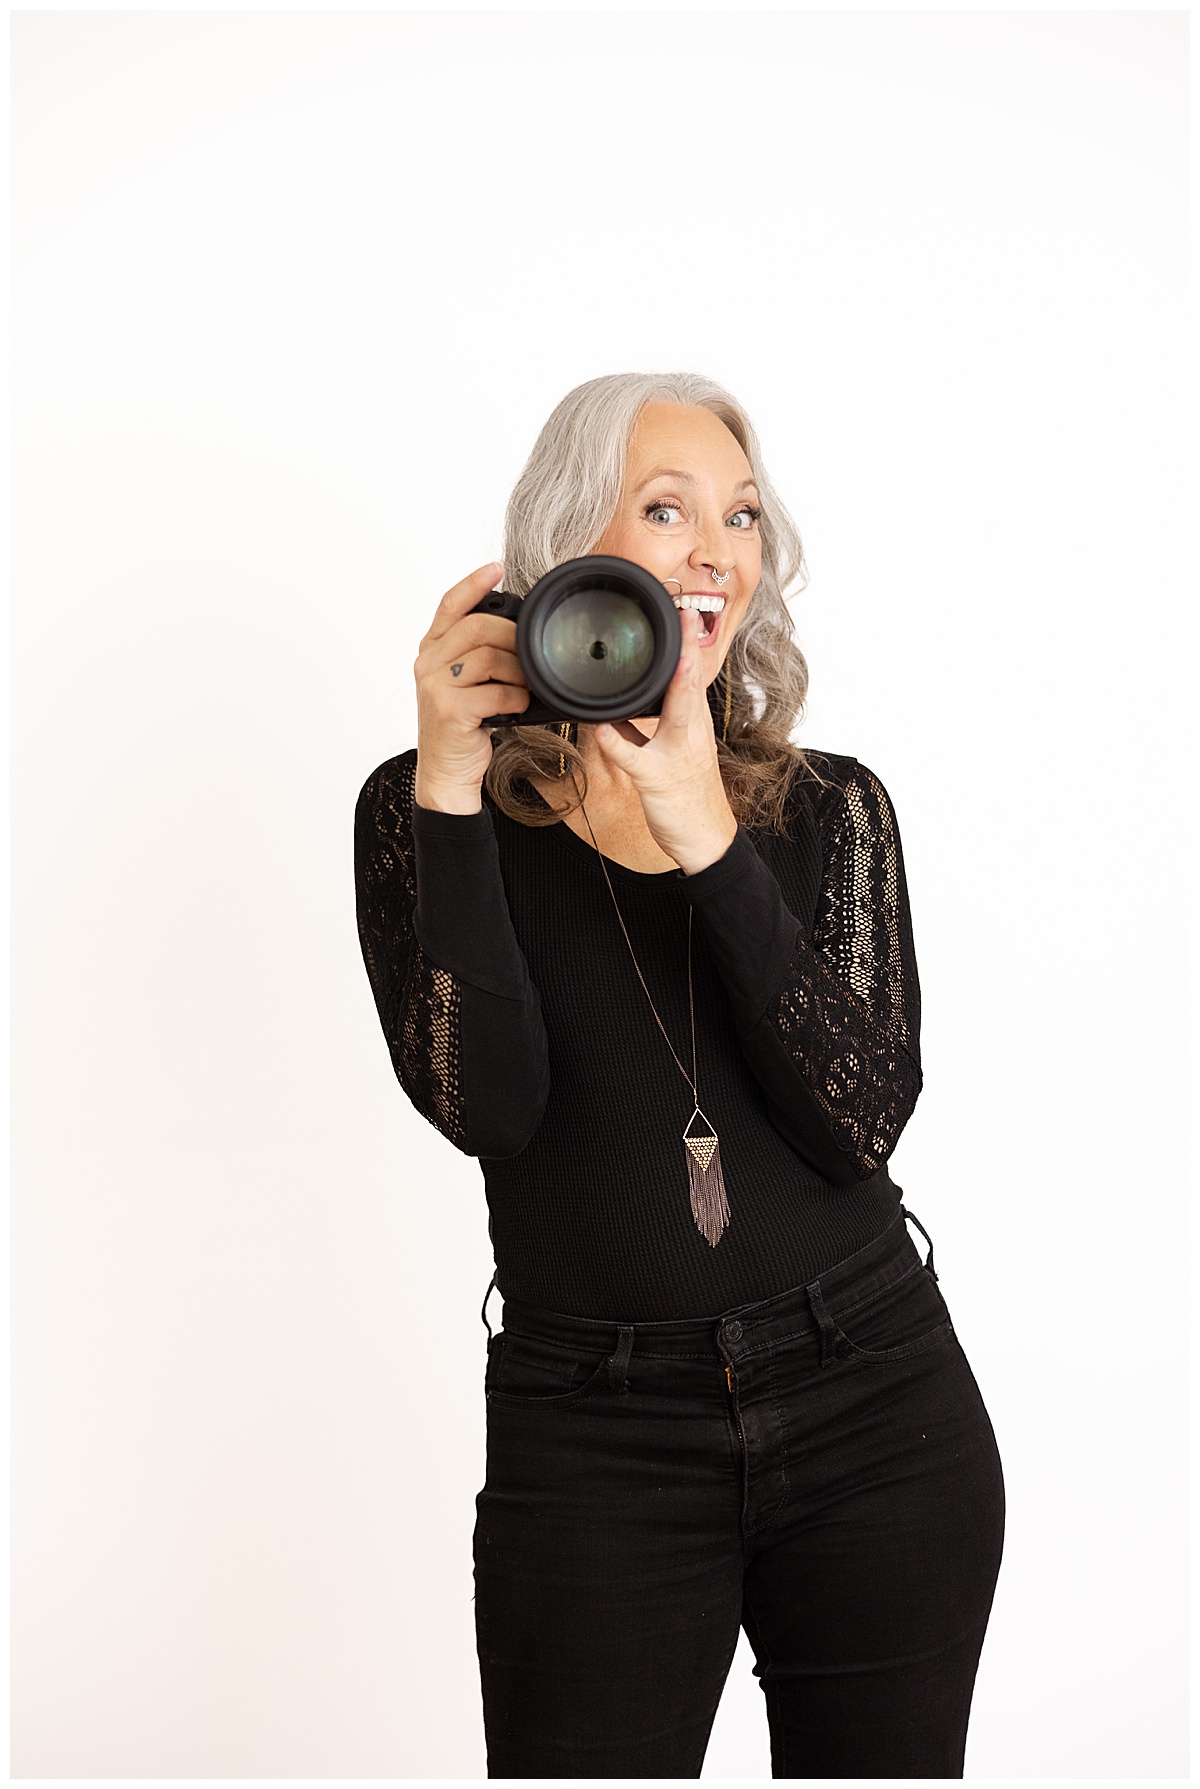 Client smiles behind her camera using Tips for your brand photoshoot